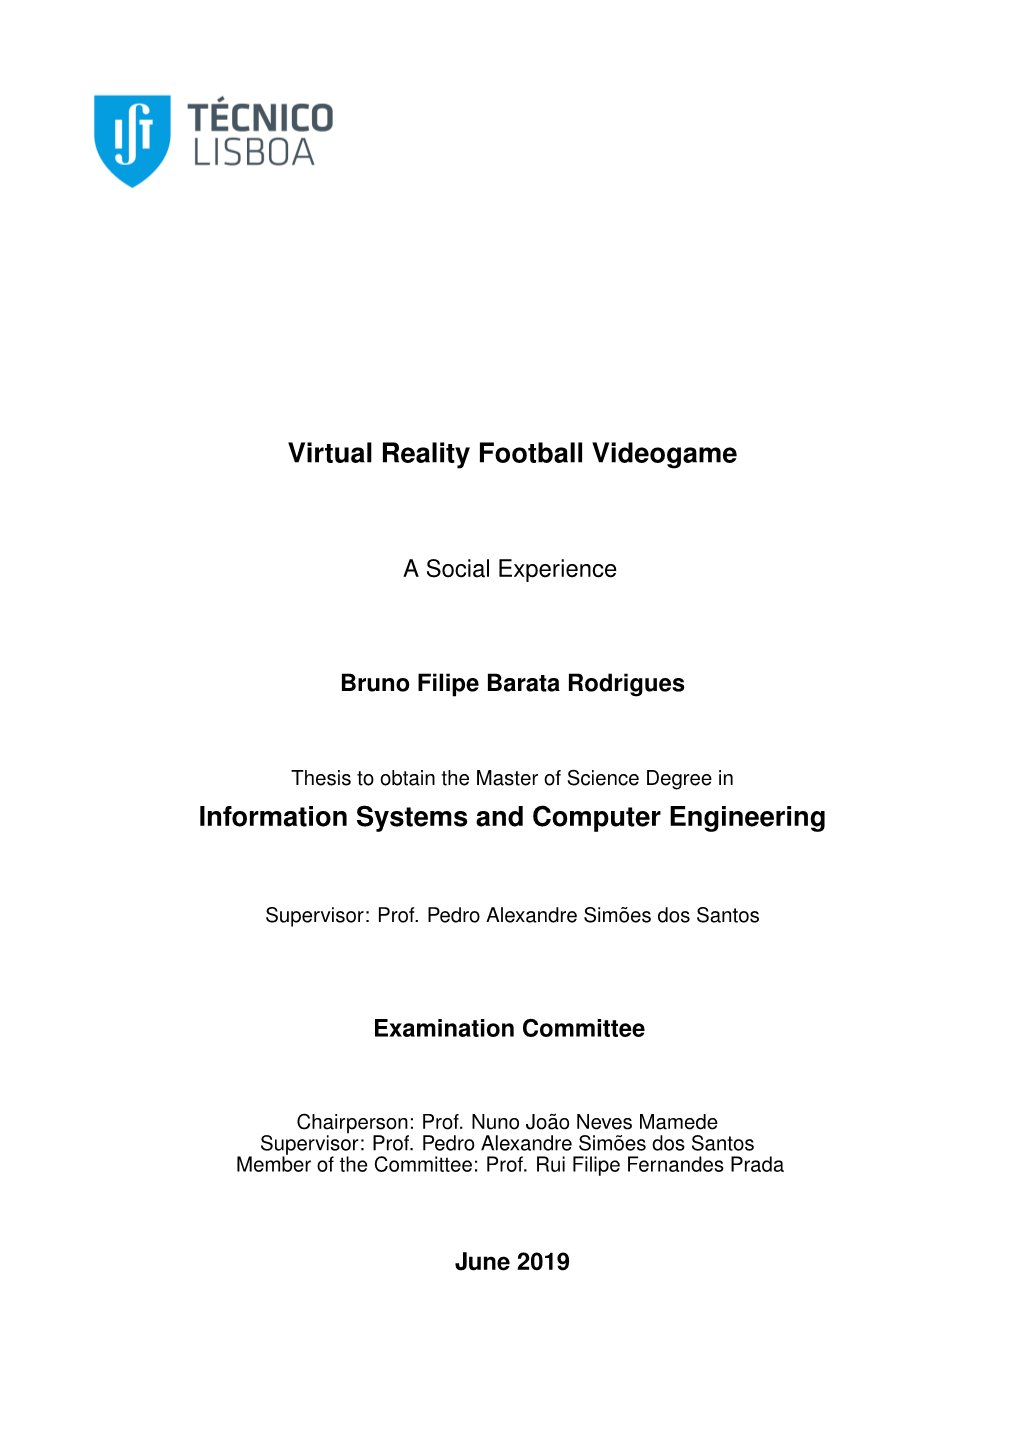 Virtual Reality Football Videogame Information Systems and Computer